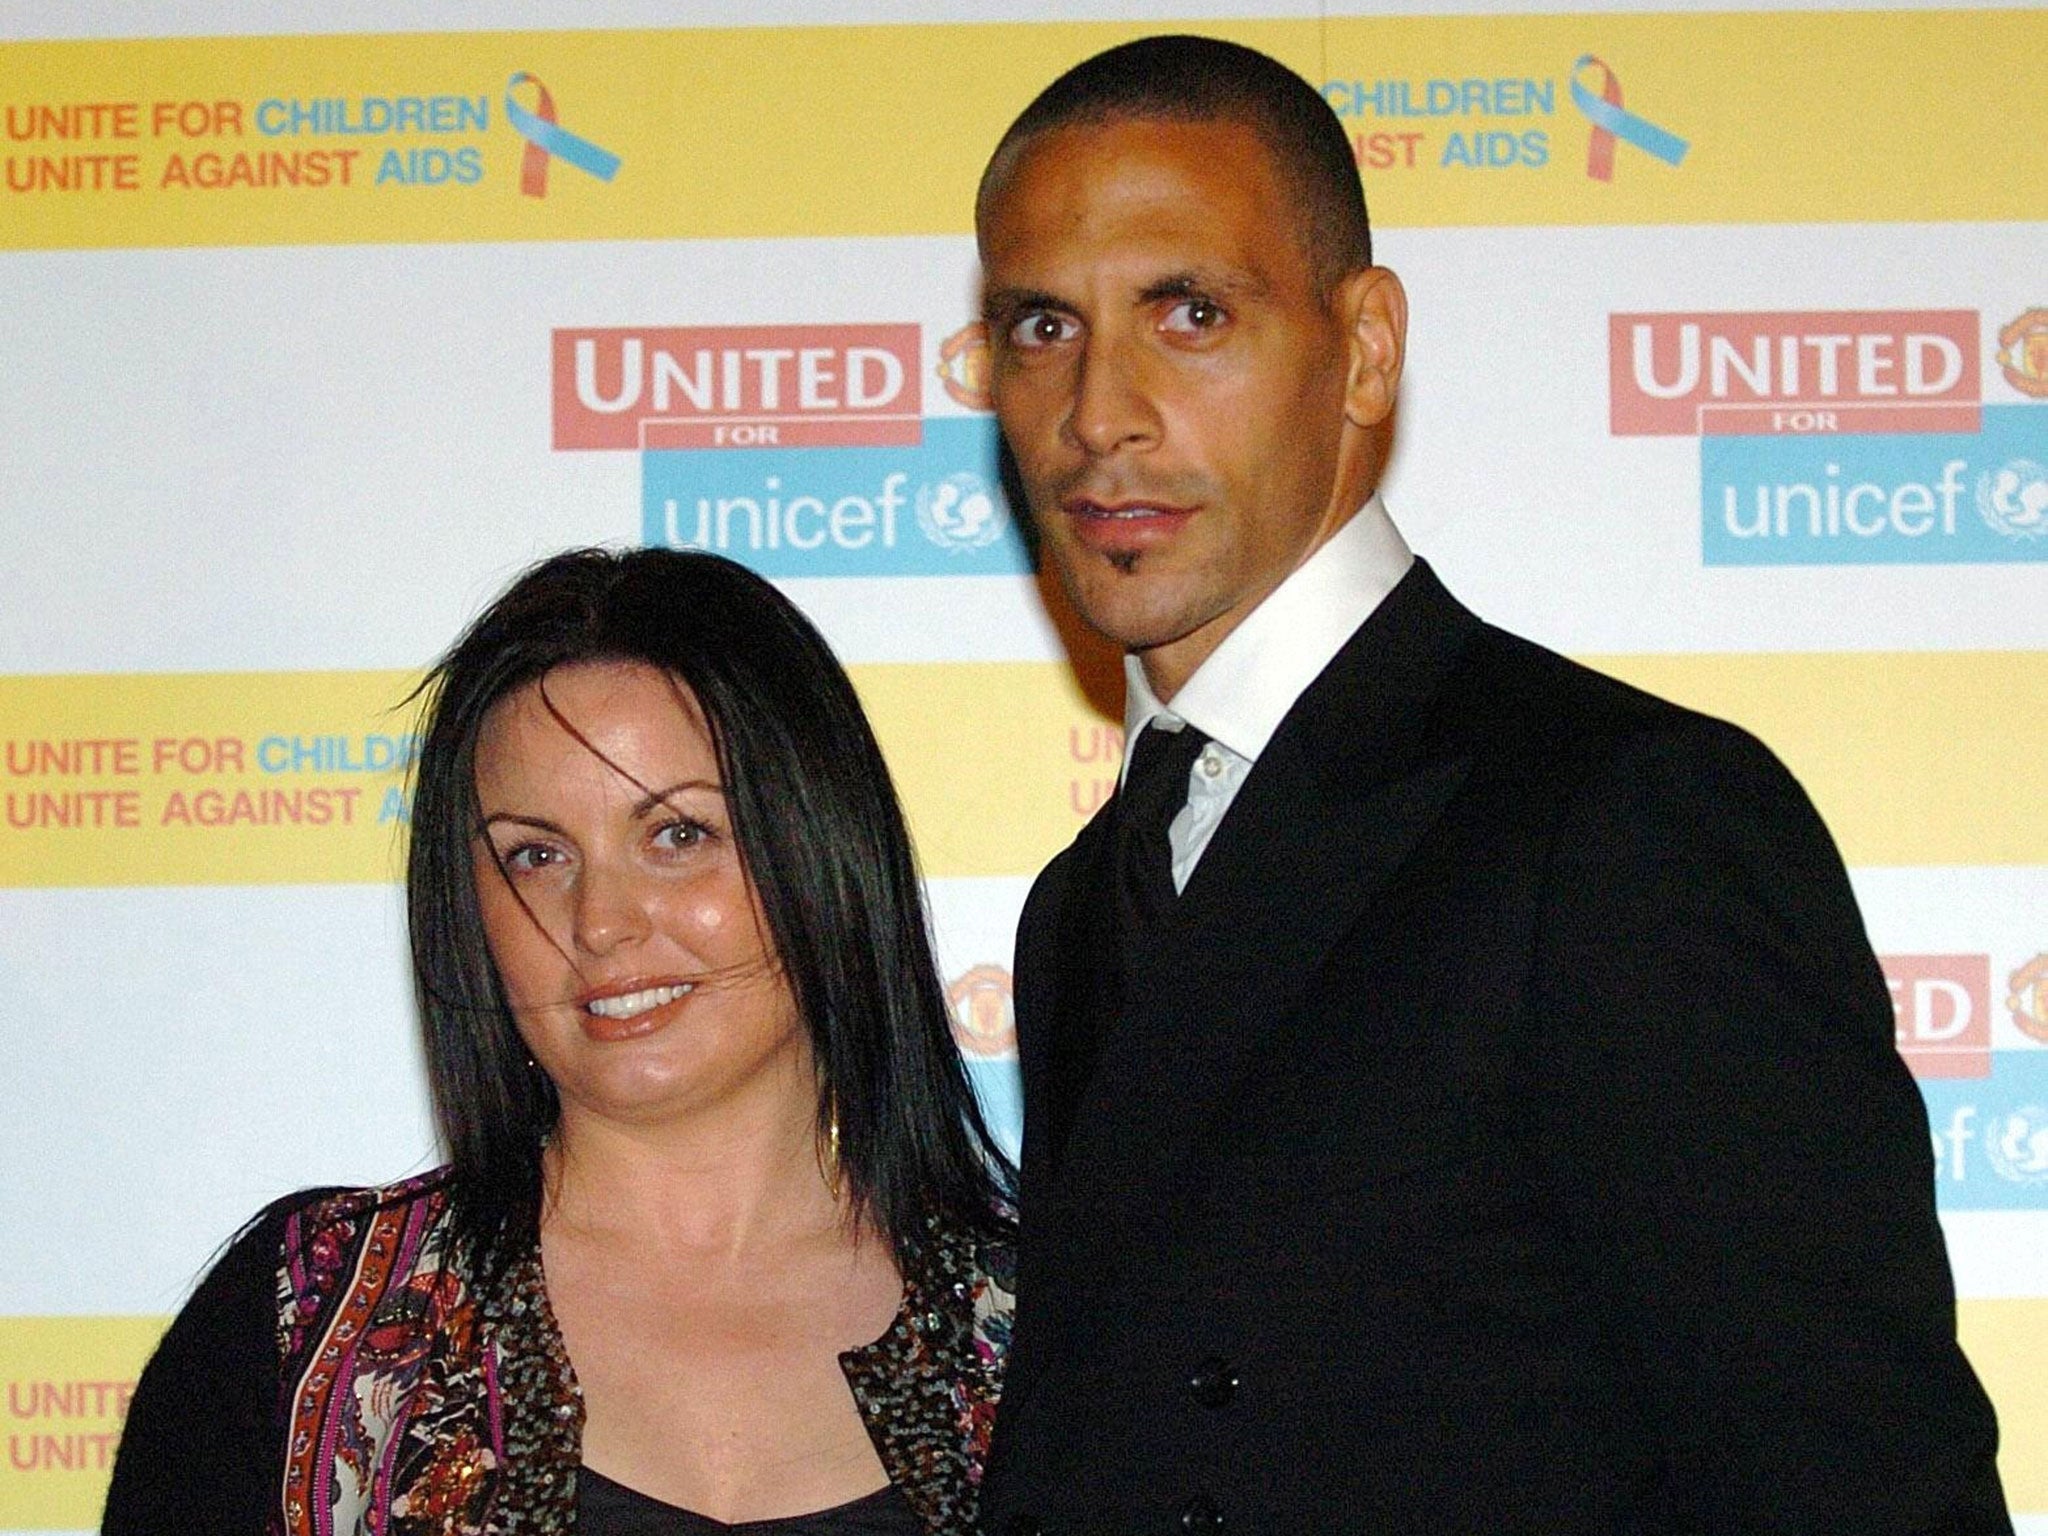 Rebecca, pictured here with her husband in 2006, passed away on Friday